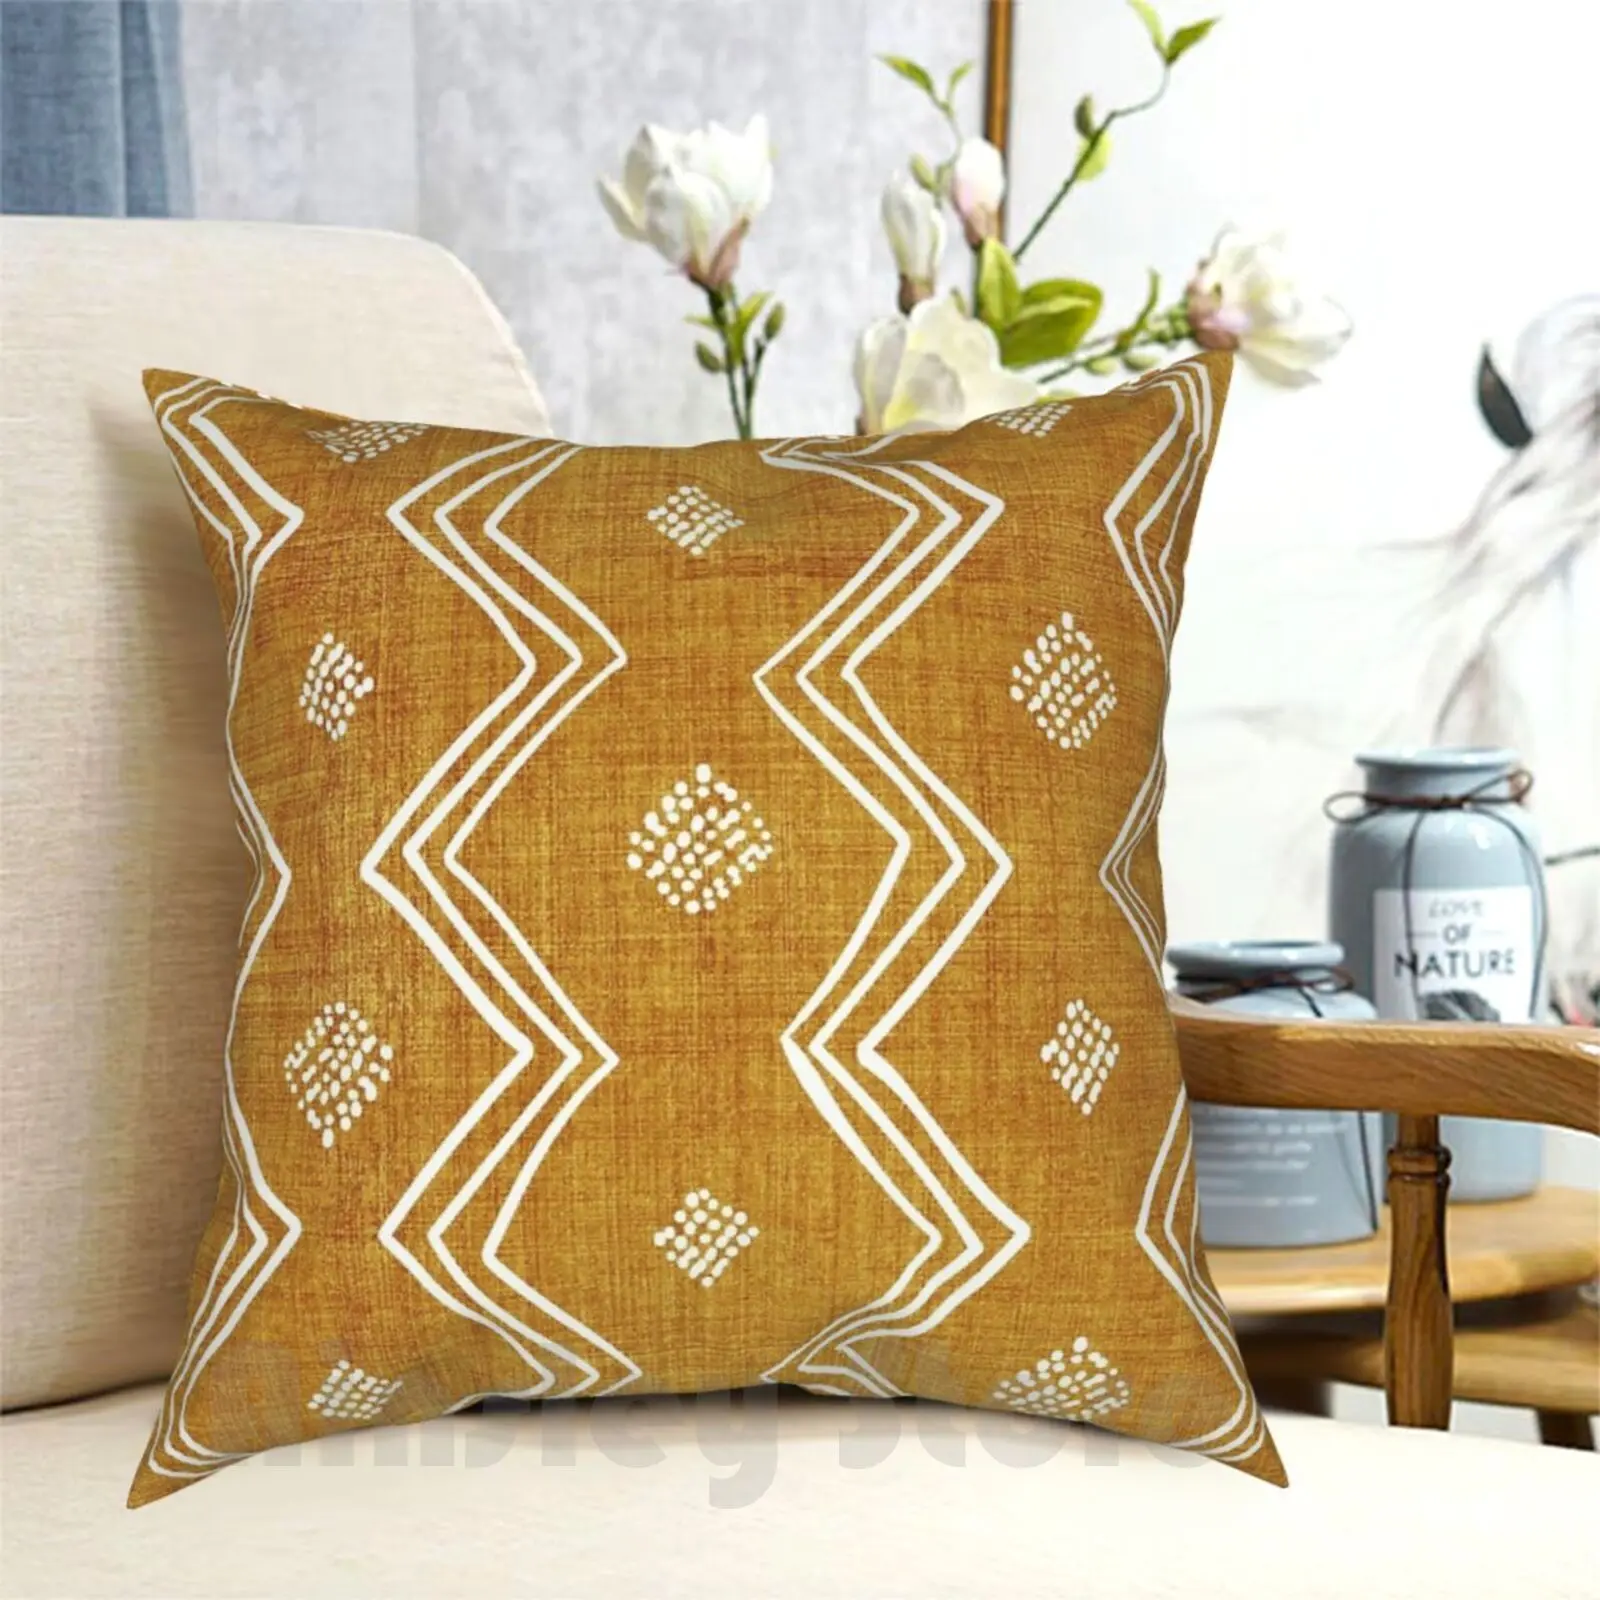 

Village In Gold Pillow Case Printed Home Soft DIY Pillow cover Mud Cloth Mudcloth Bohemian Tribal Ethnic Africa African Dye